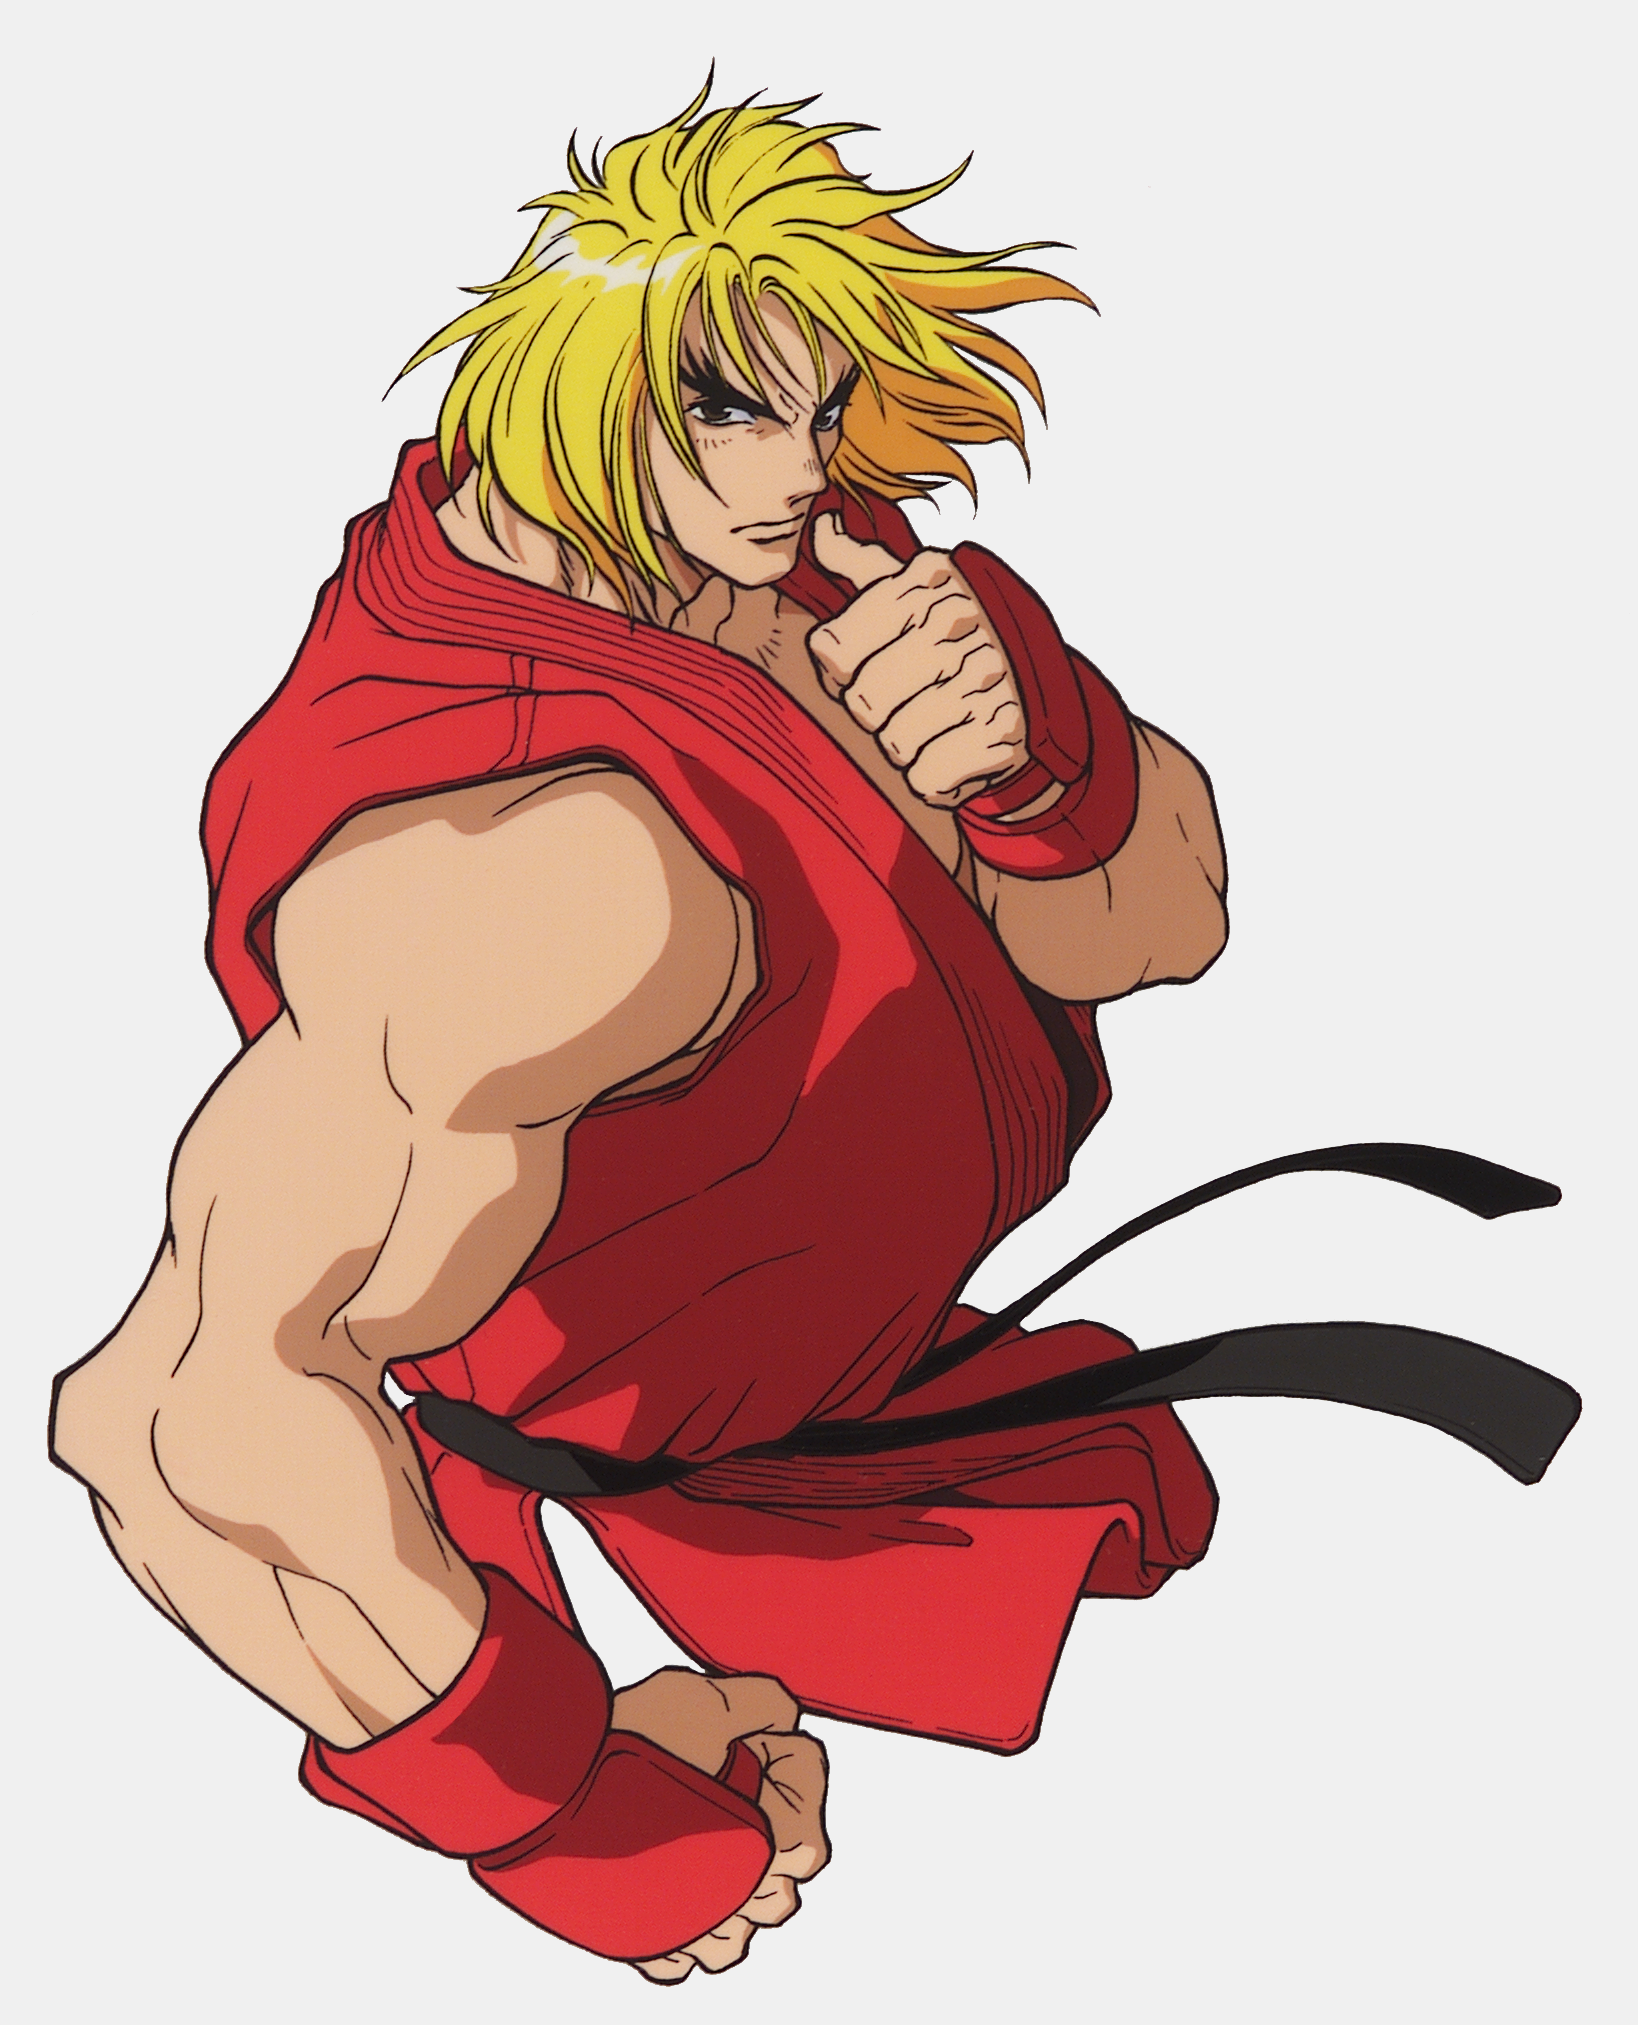 All Street Fighter Anime Movies And One Show by EC1992 on DeviantArt